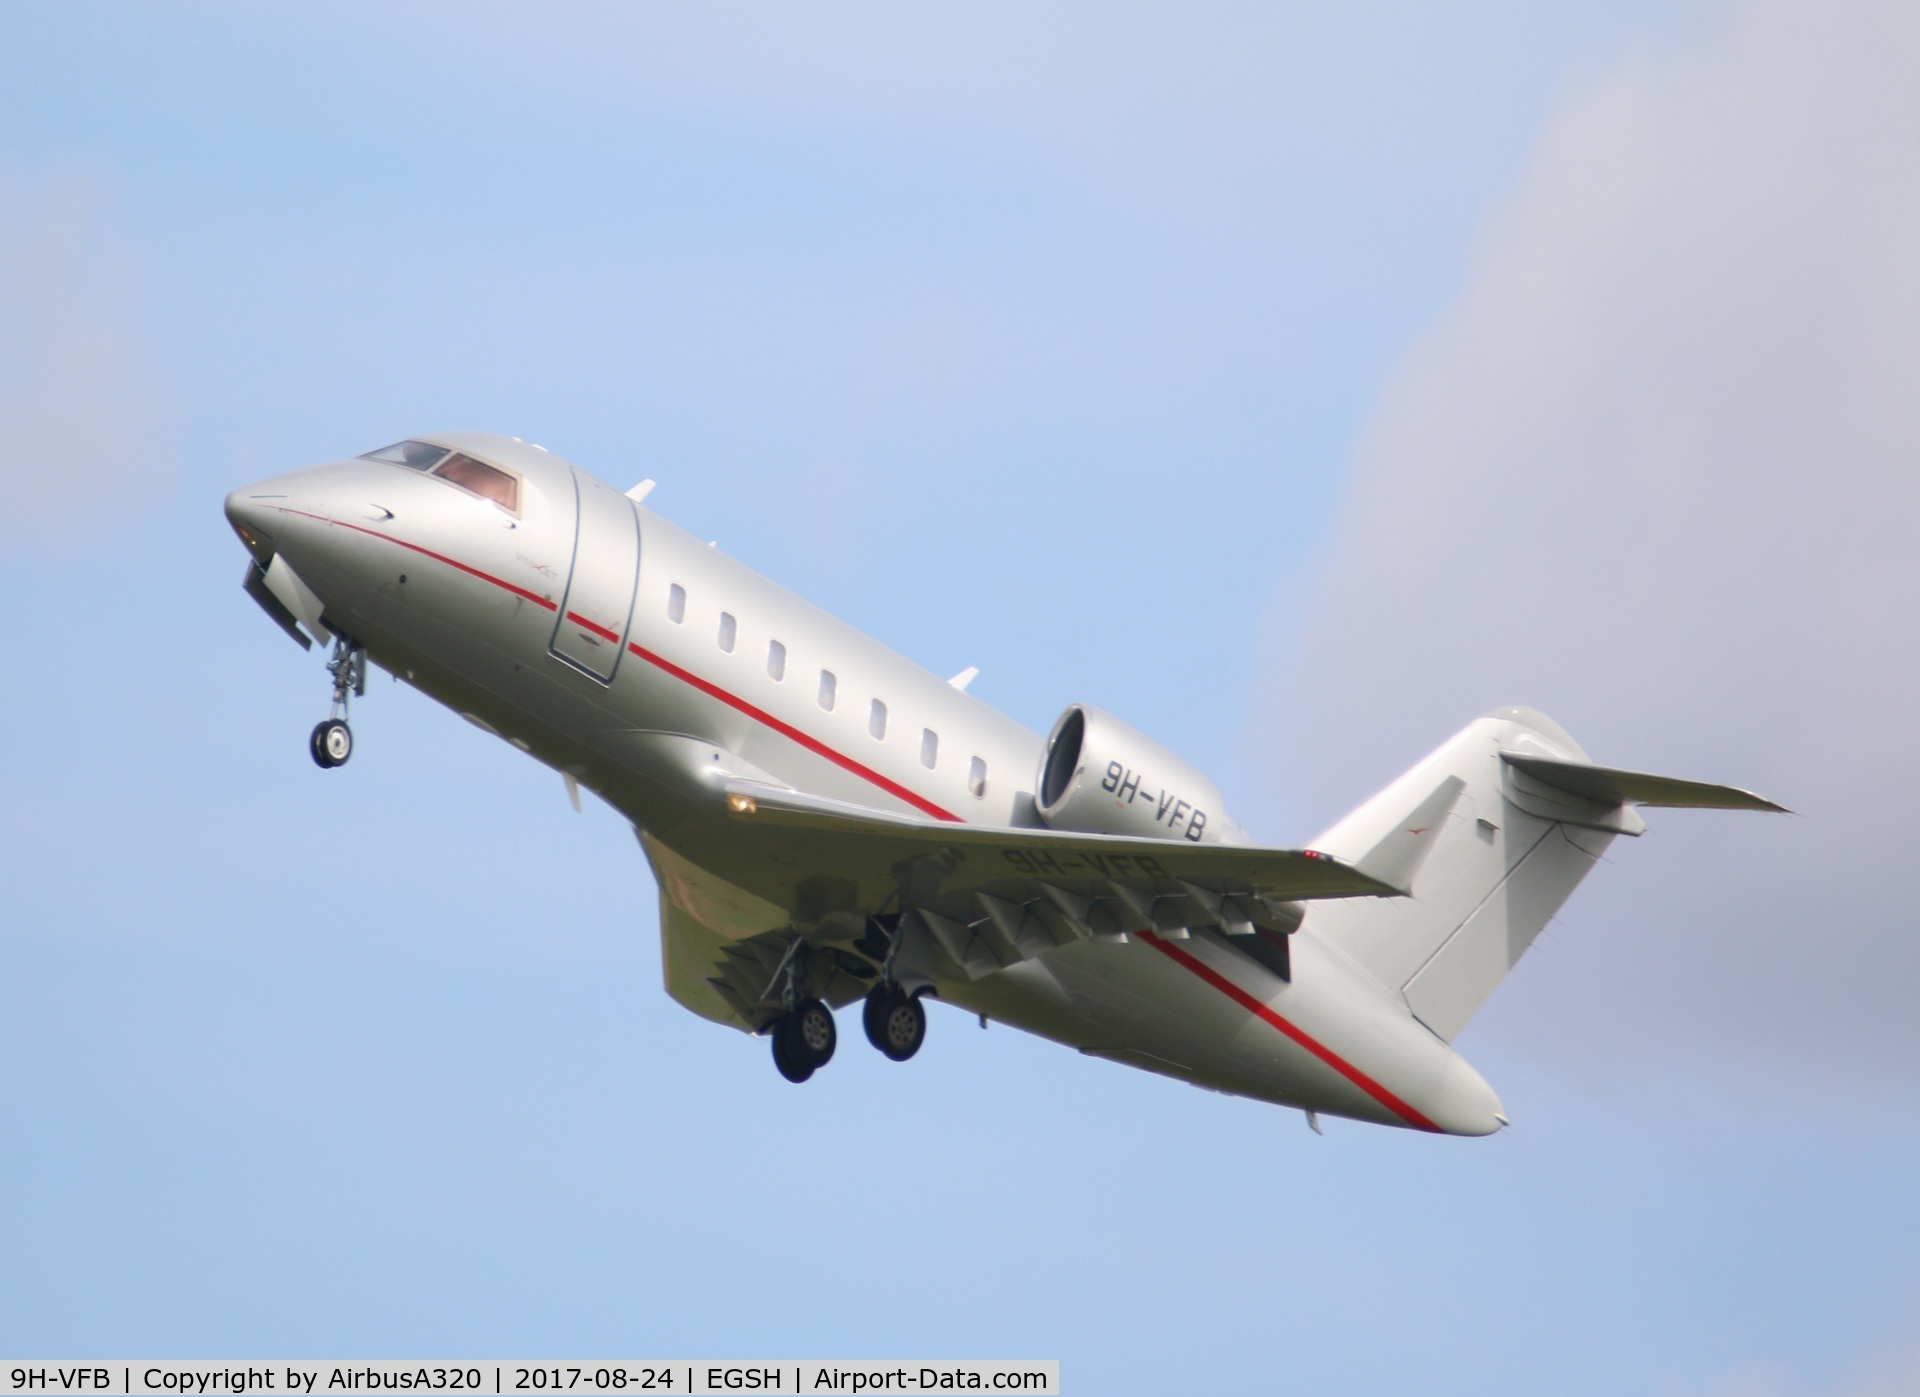 9H-VFB, 2014 Bombardier Challenger 604 (CL-600-2B16) C/N 5971, departing on a rare nice sunny day